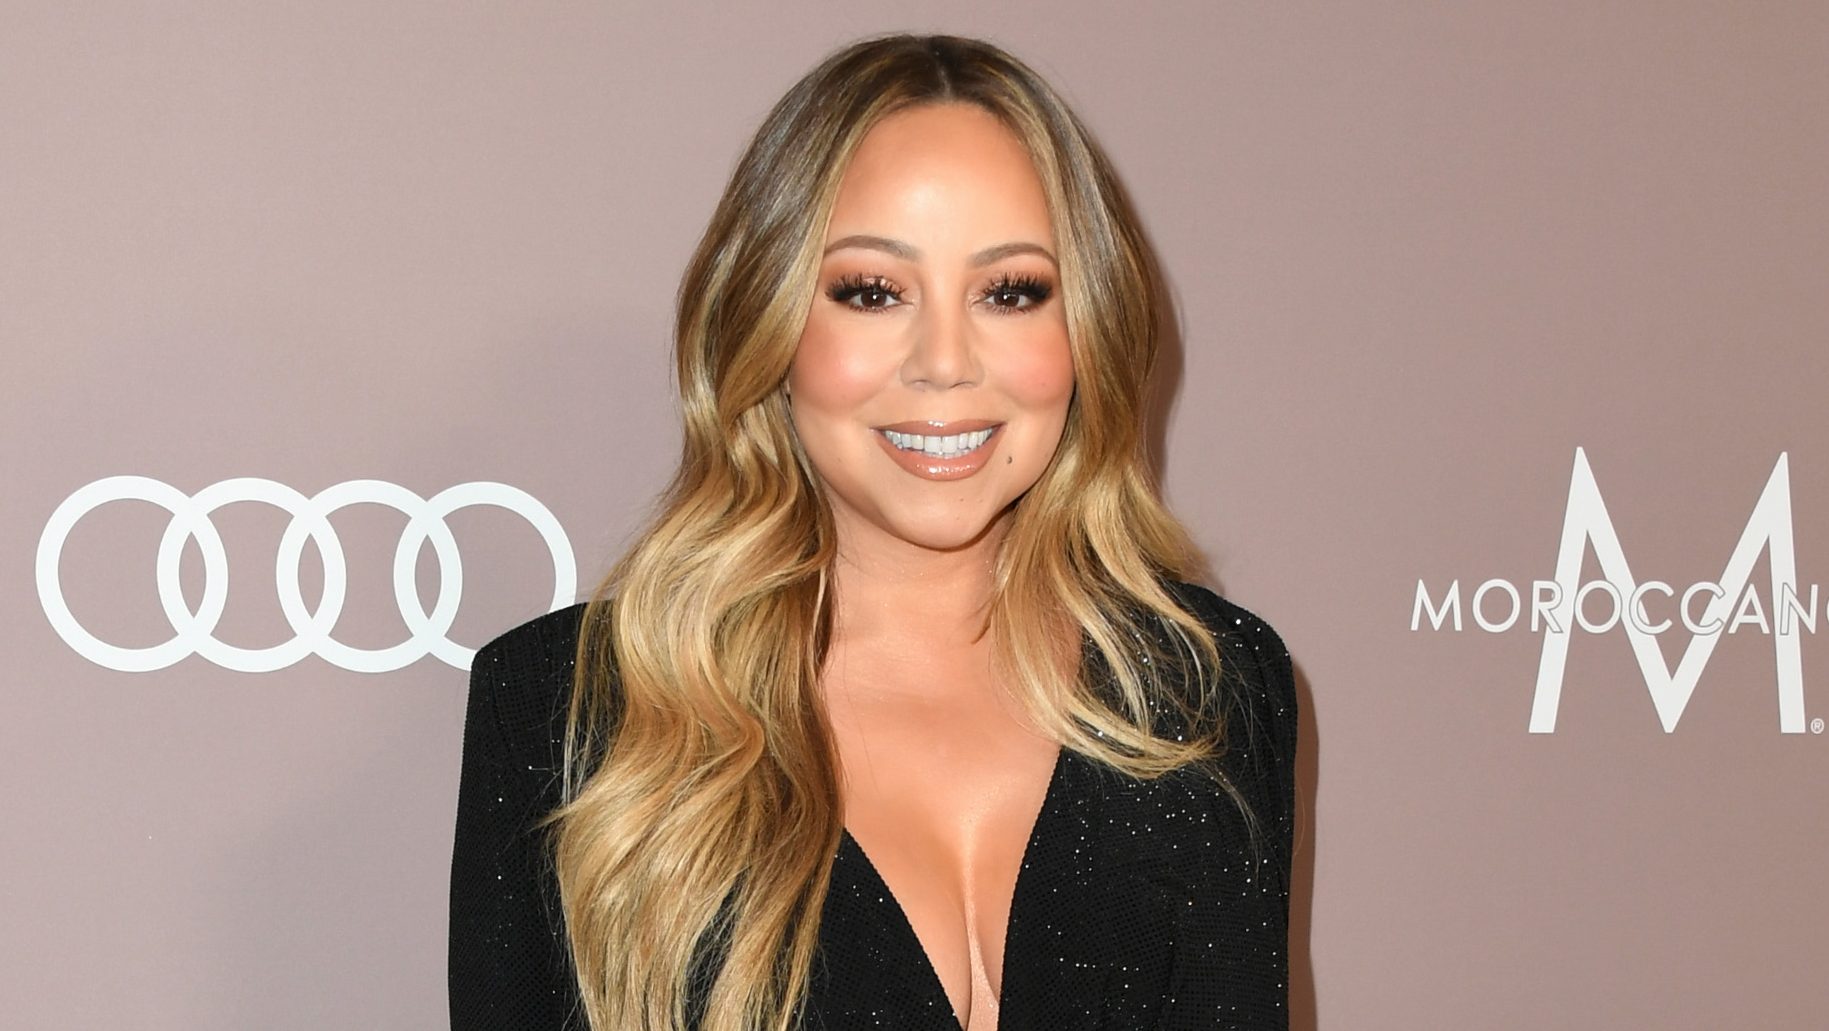 Which Music Video Was Mariah Carey’s Directorial Debut?